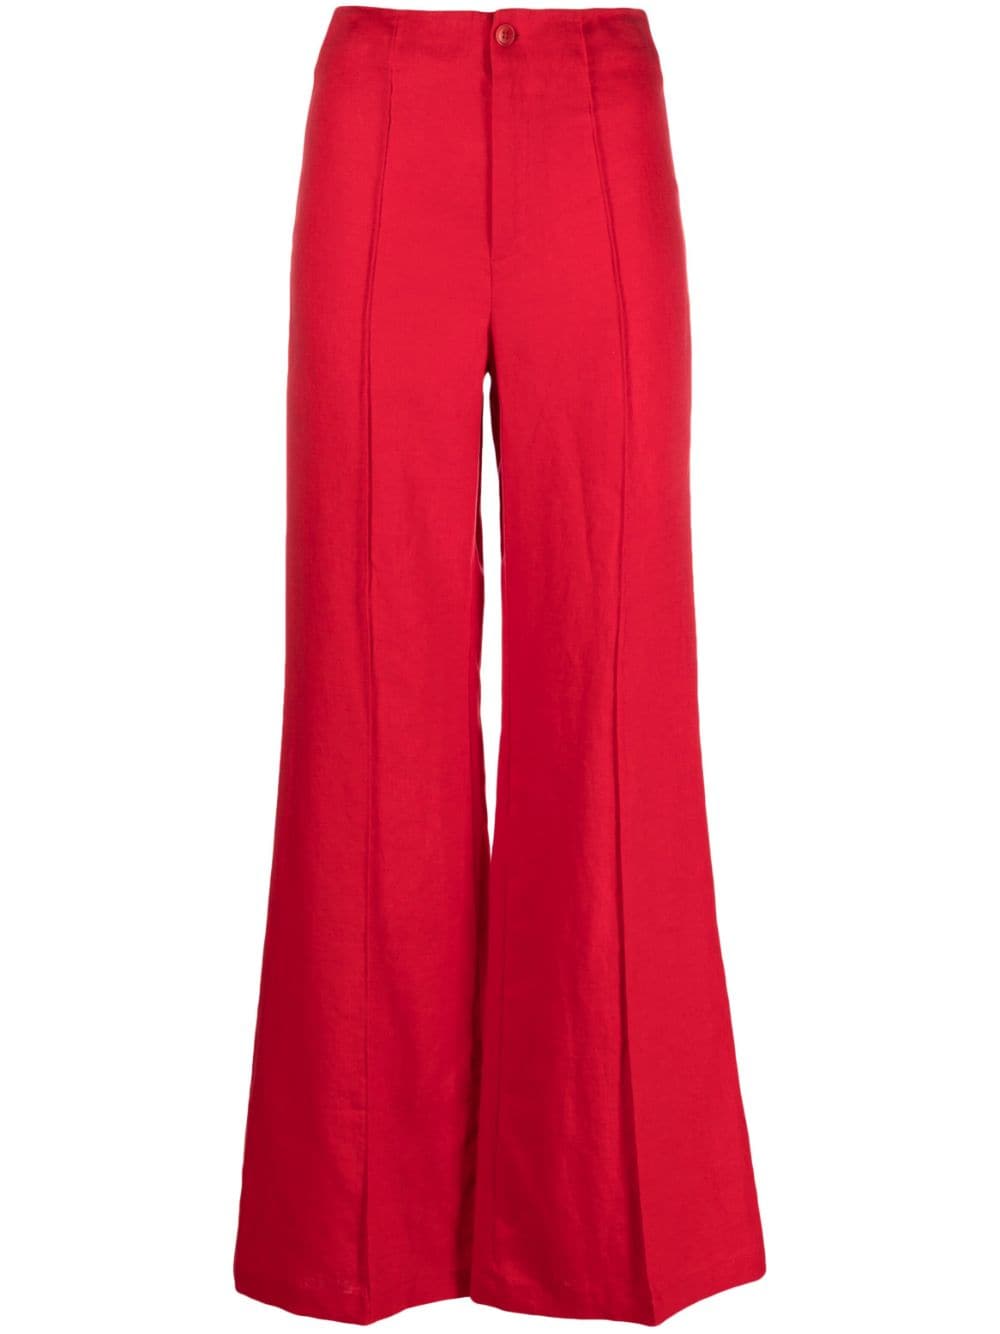 Cherry Wide Leg Palazzo Trousers  Red wide leg trousers Palazzo pants  plus size Red palazzo pants